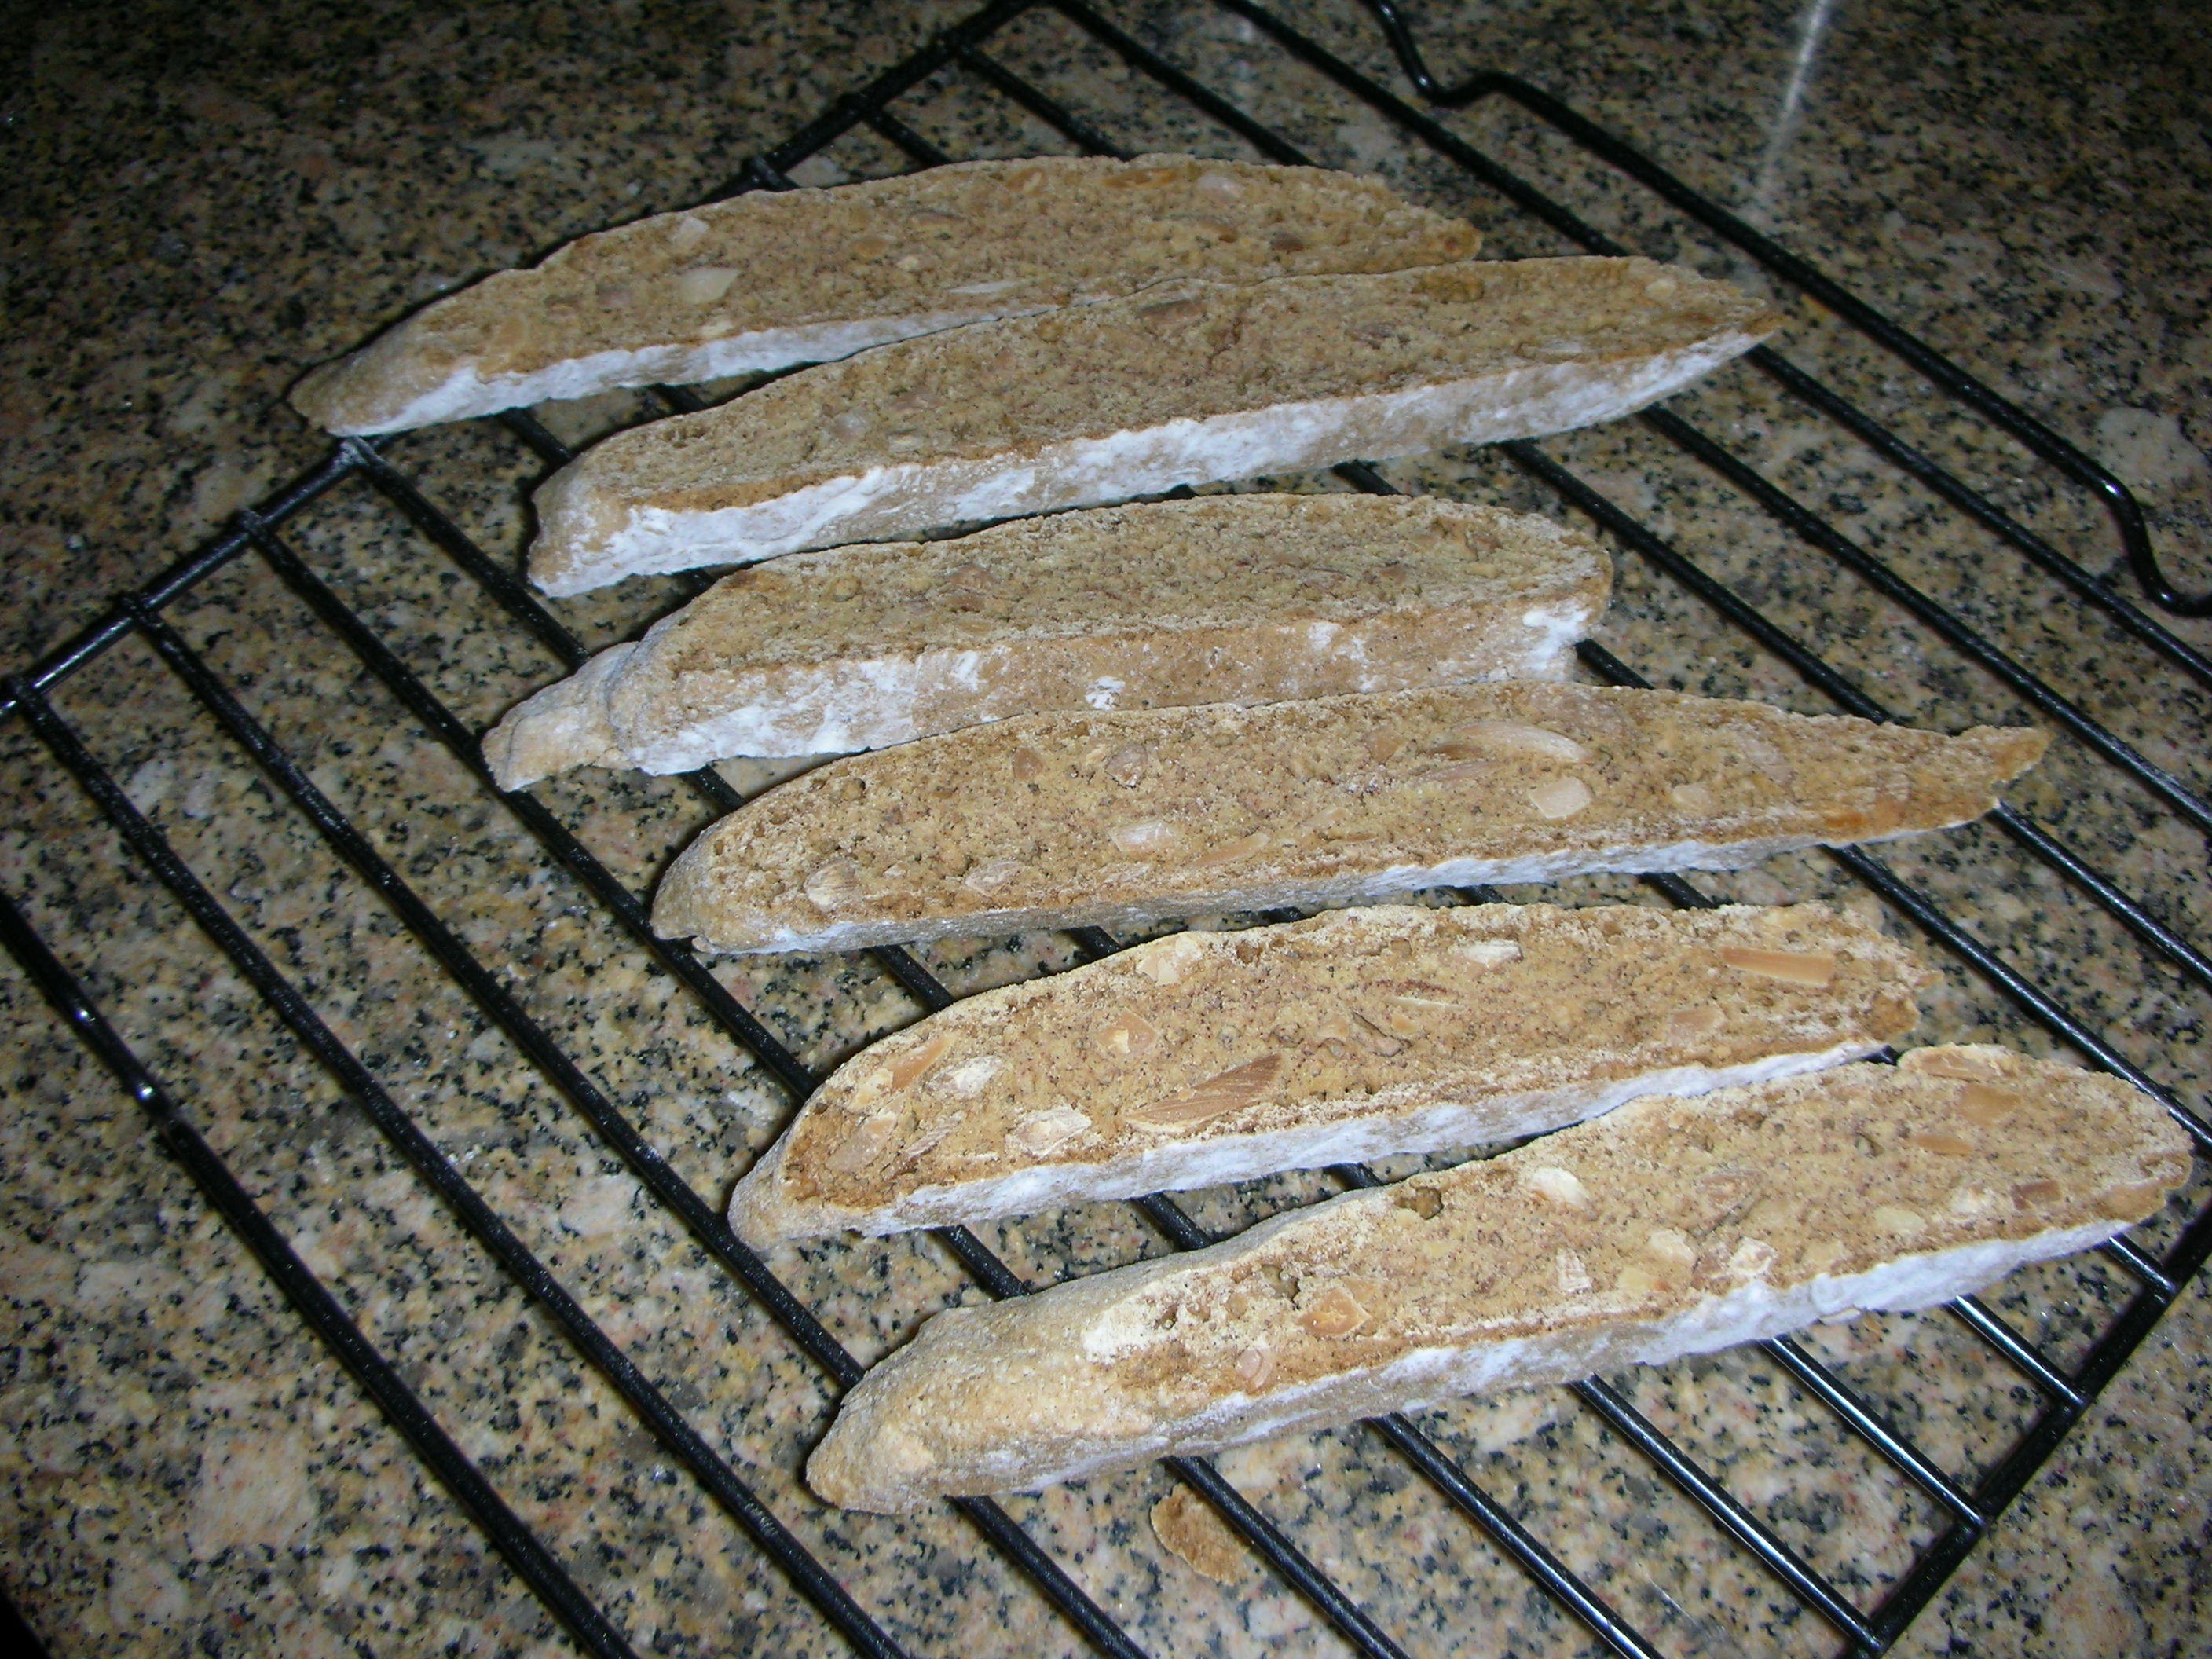 Tuscan almond biscotti second baking sliced